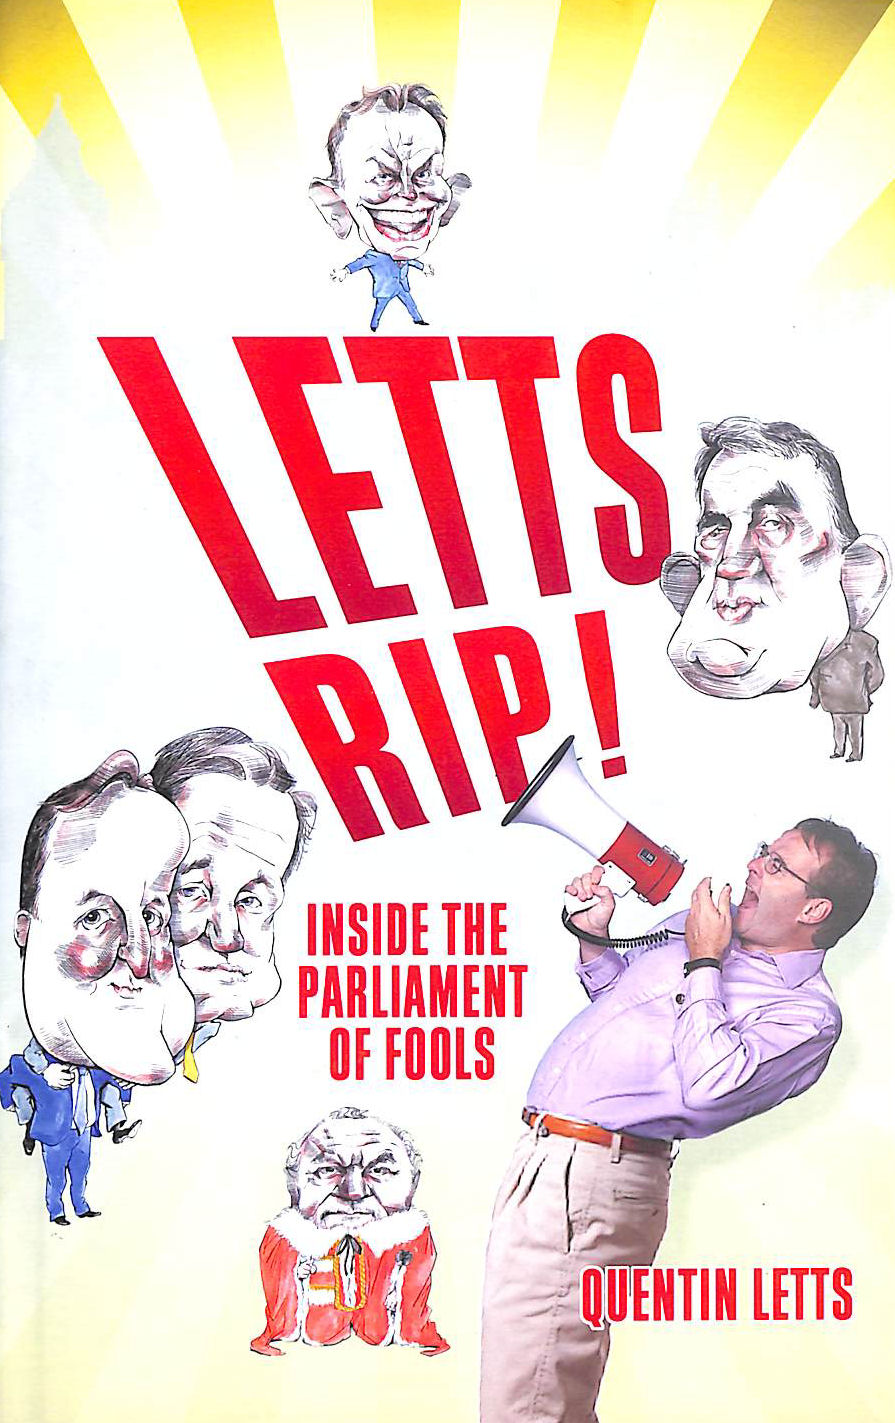 QUENTIN LETTS - Letts Rip! Inside the Parliament of Fools